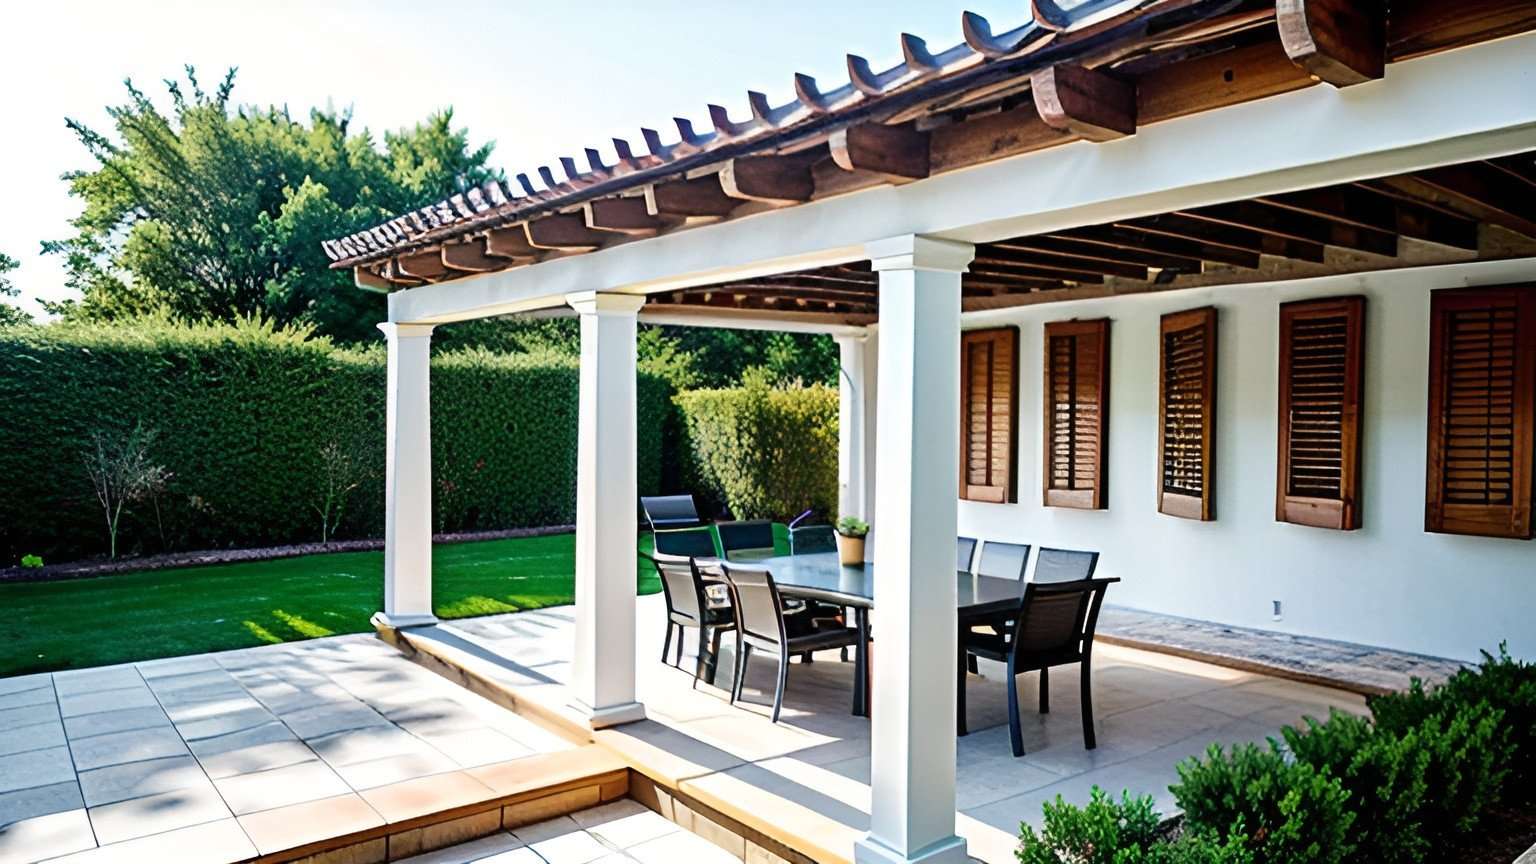 Modern pergola with roof connected to house, landscaped backyard, outdoor living